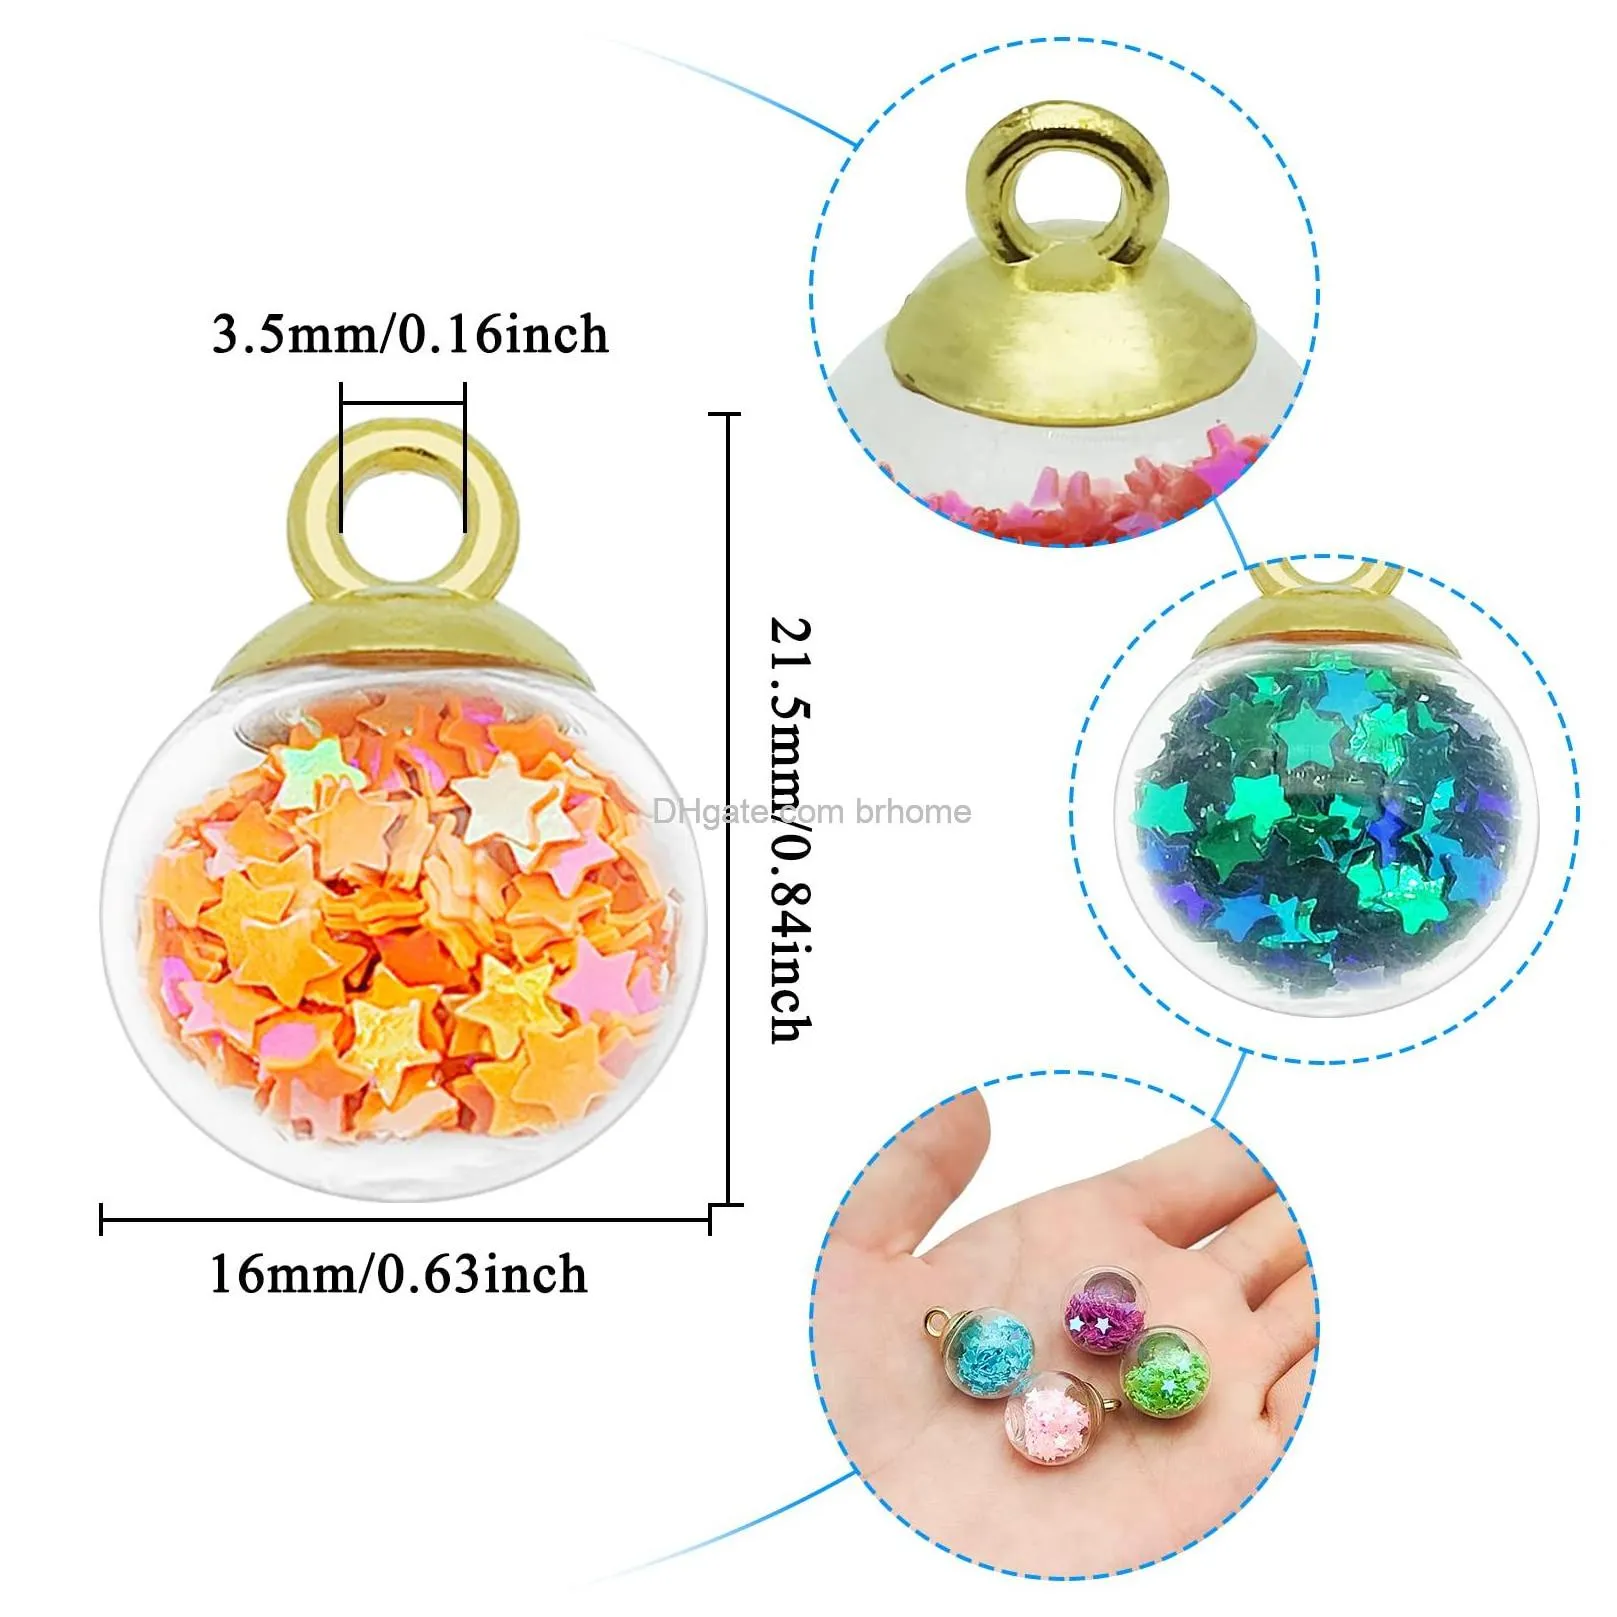 16mm colorful glass ball pendants with tiny shiny star beads mixed crystal glass ball pendants jewelry making supplies pendant craft accessory for diy necklace bracelet earring craft